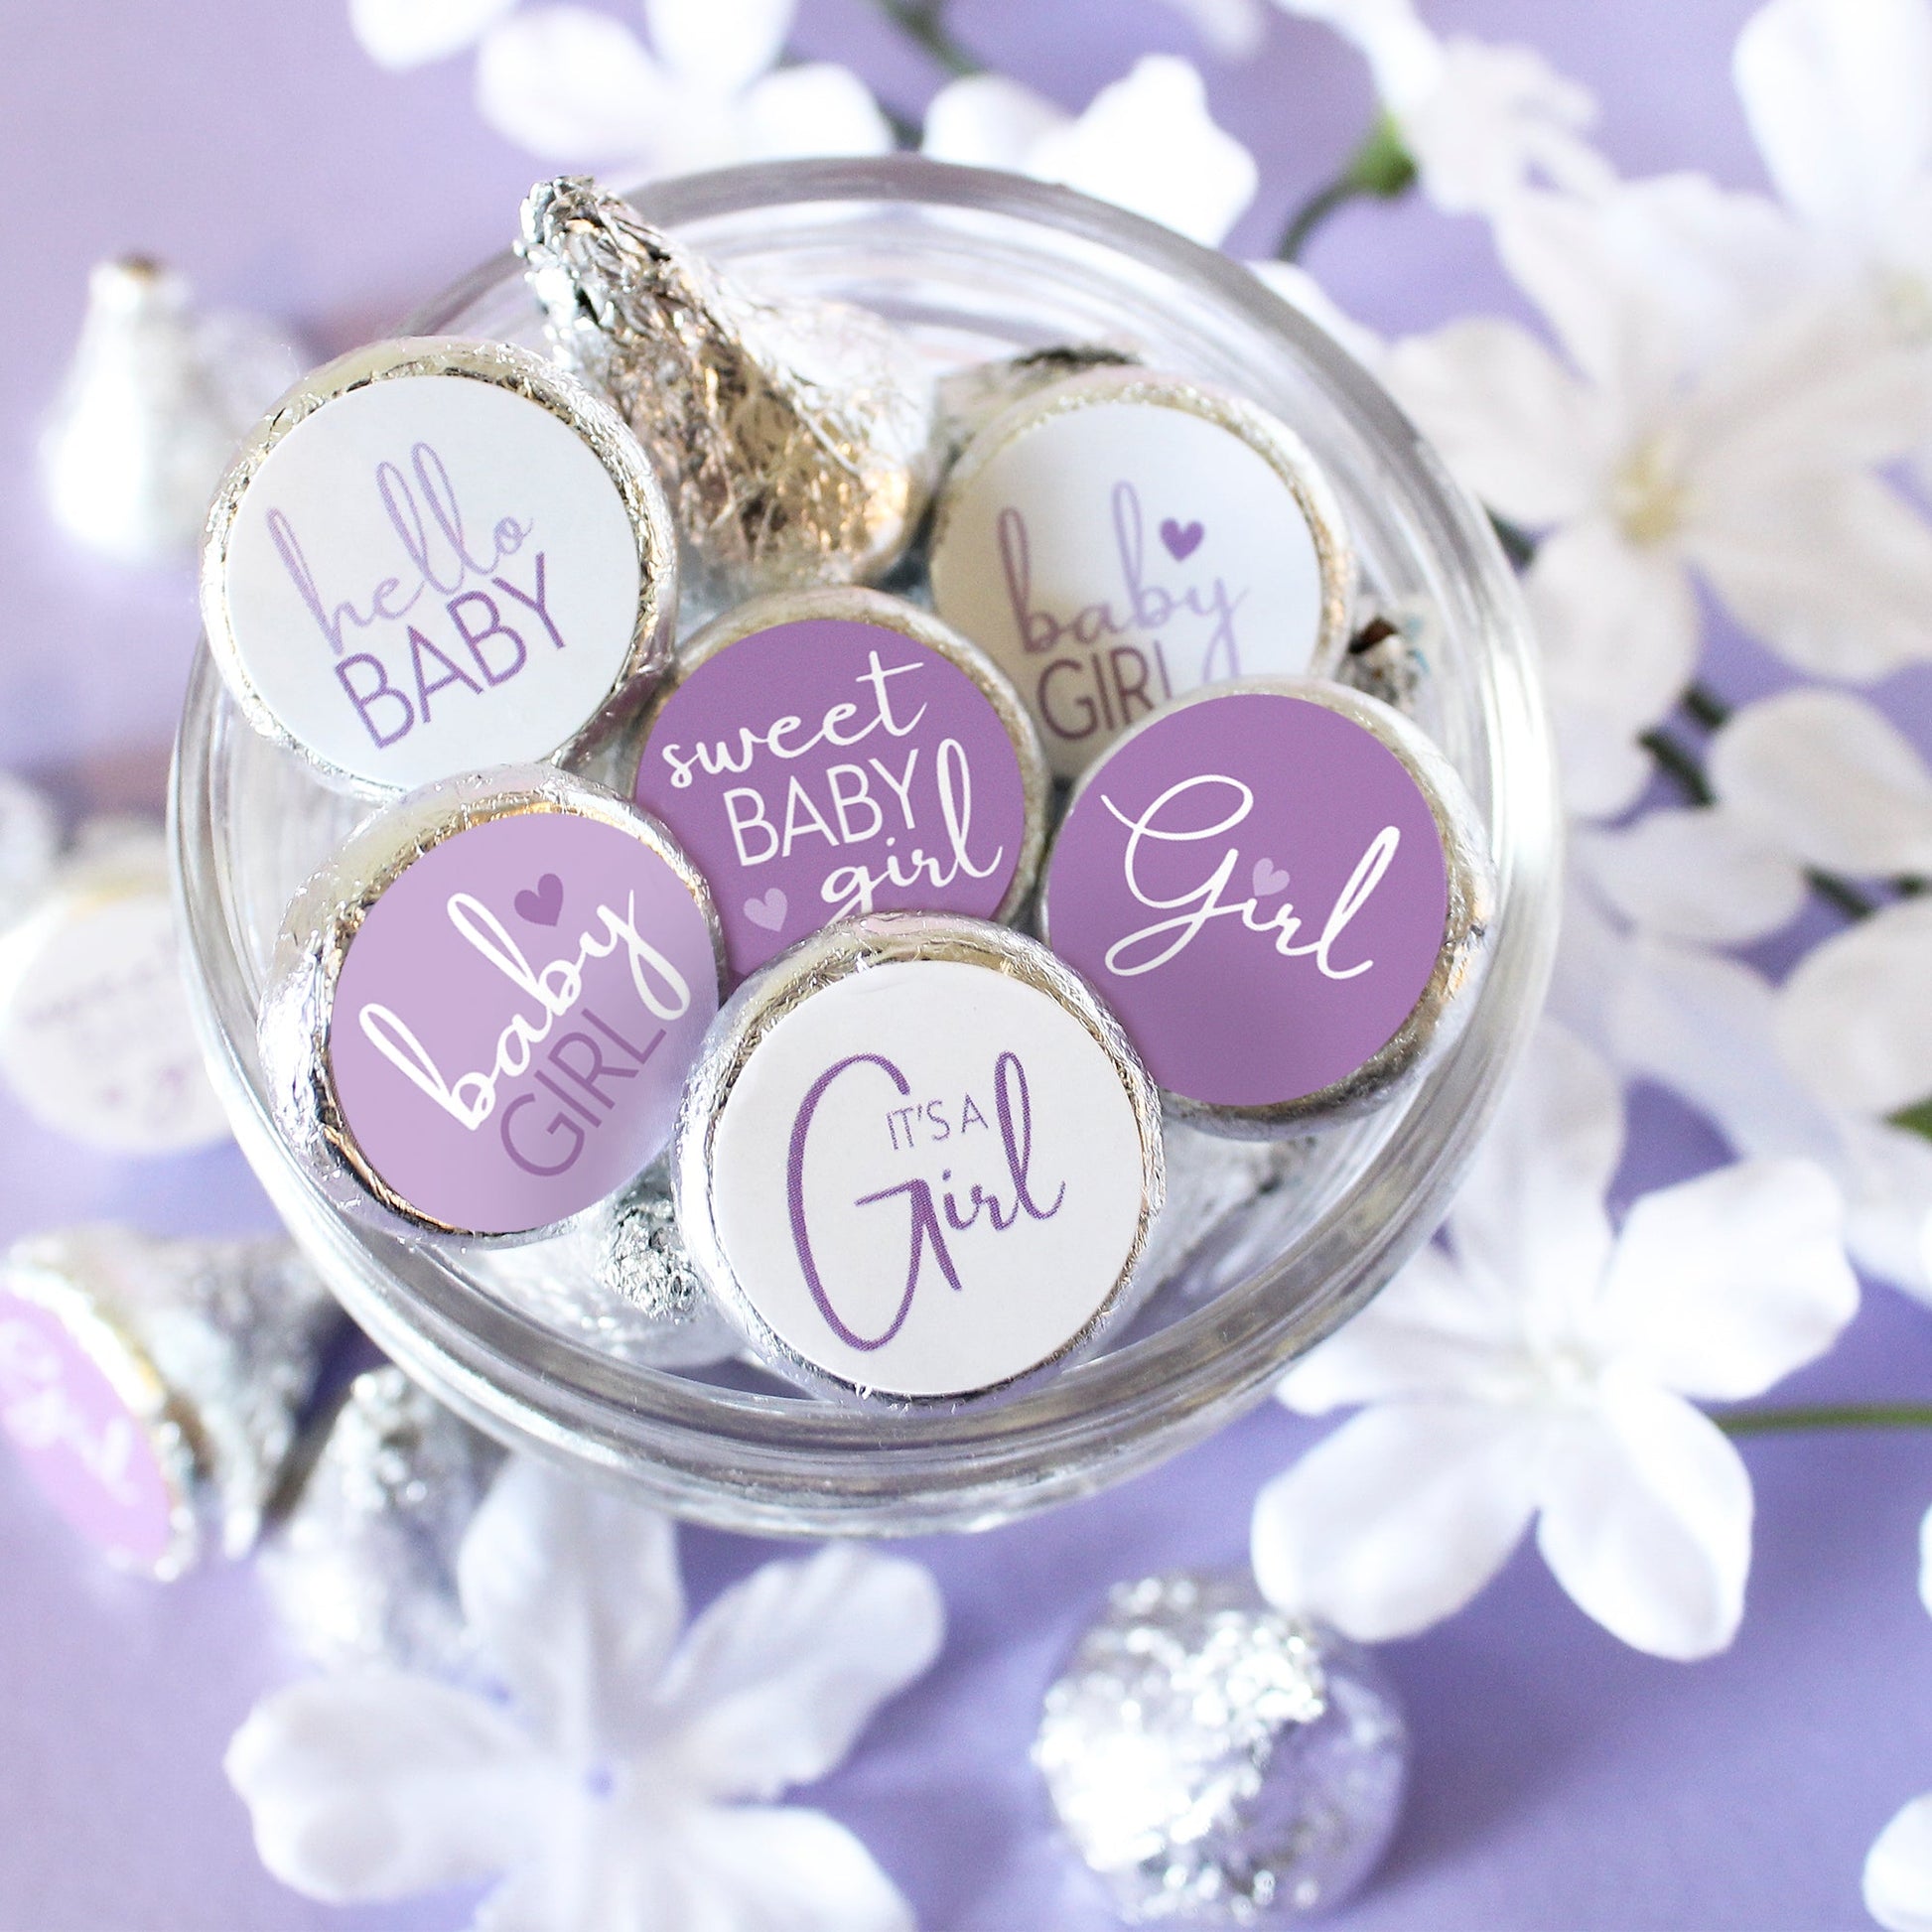 A photo of a jar filled with kisses candies, each one adorned with a purple 'It's a Girl' sticker.